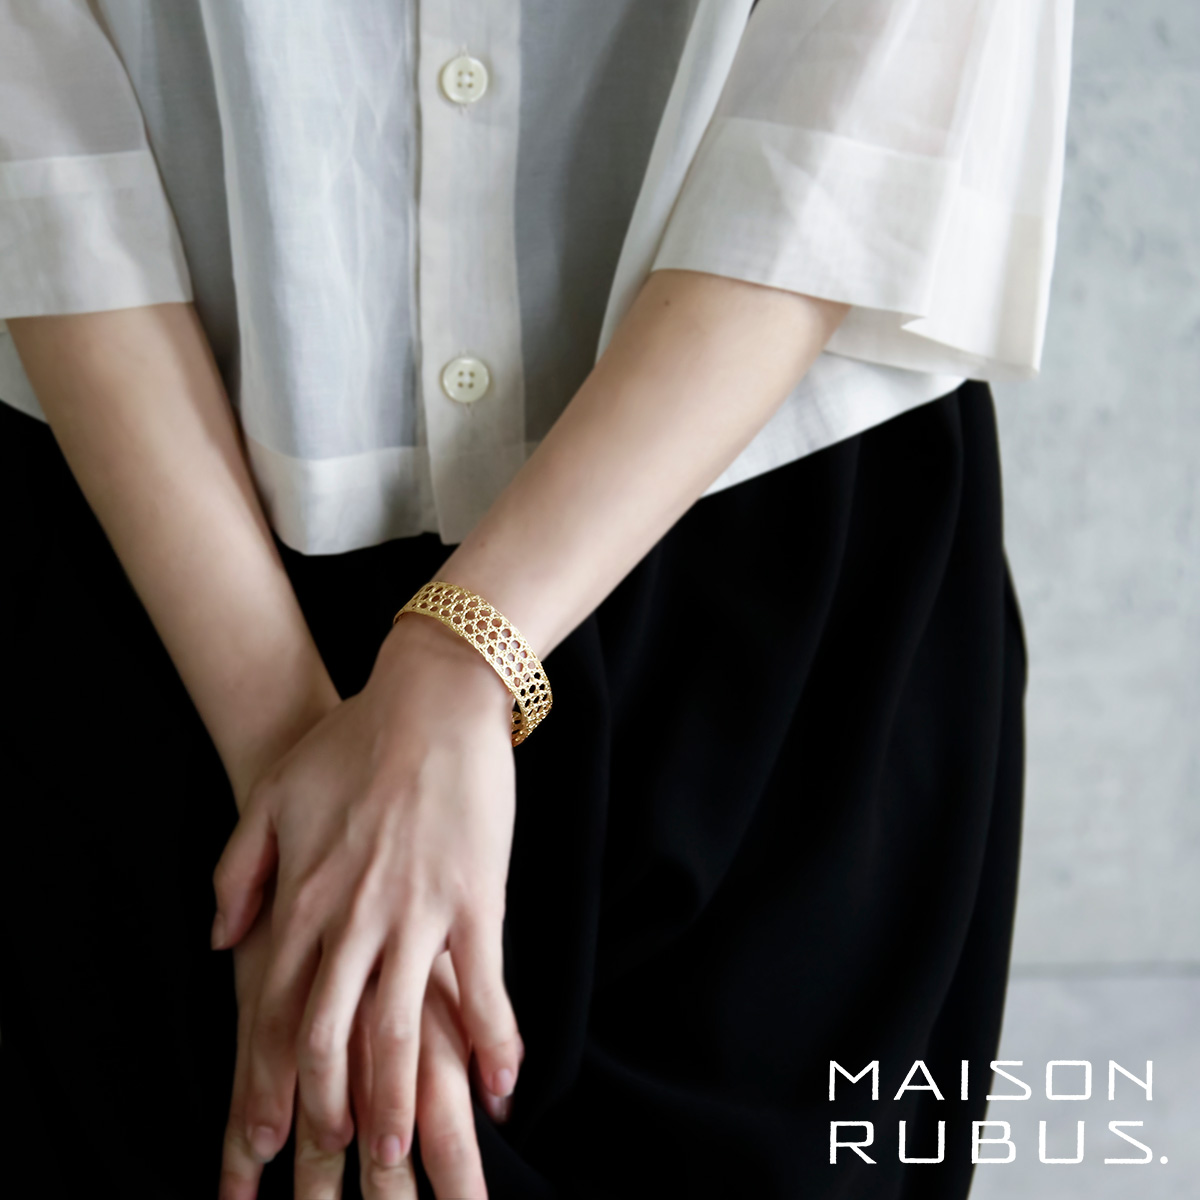 MAISON RUBUS.(][oX)RNV Vo[~CG[S[hbL [X oO L grecollection lace bangle Lh re-002